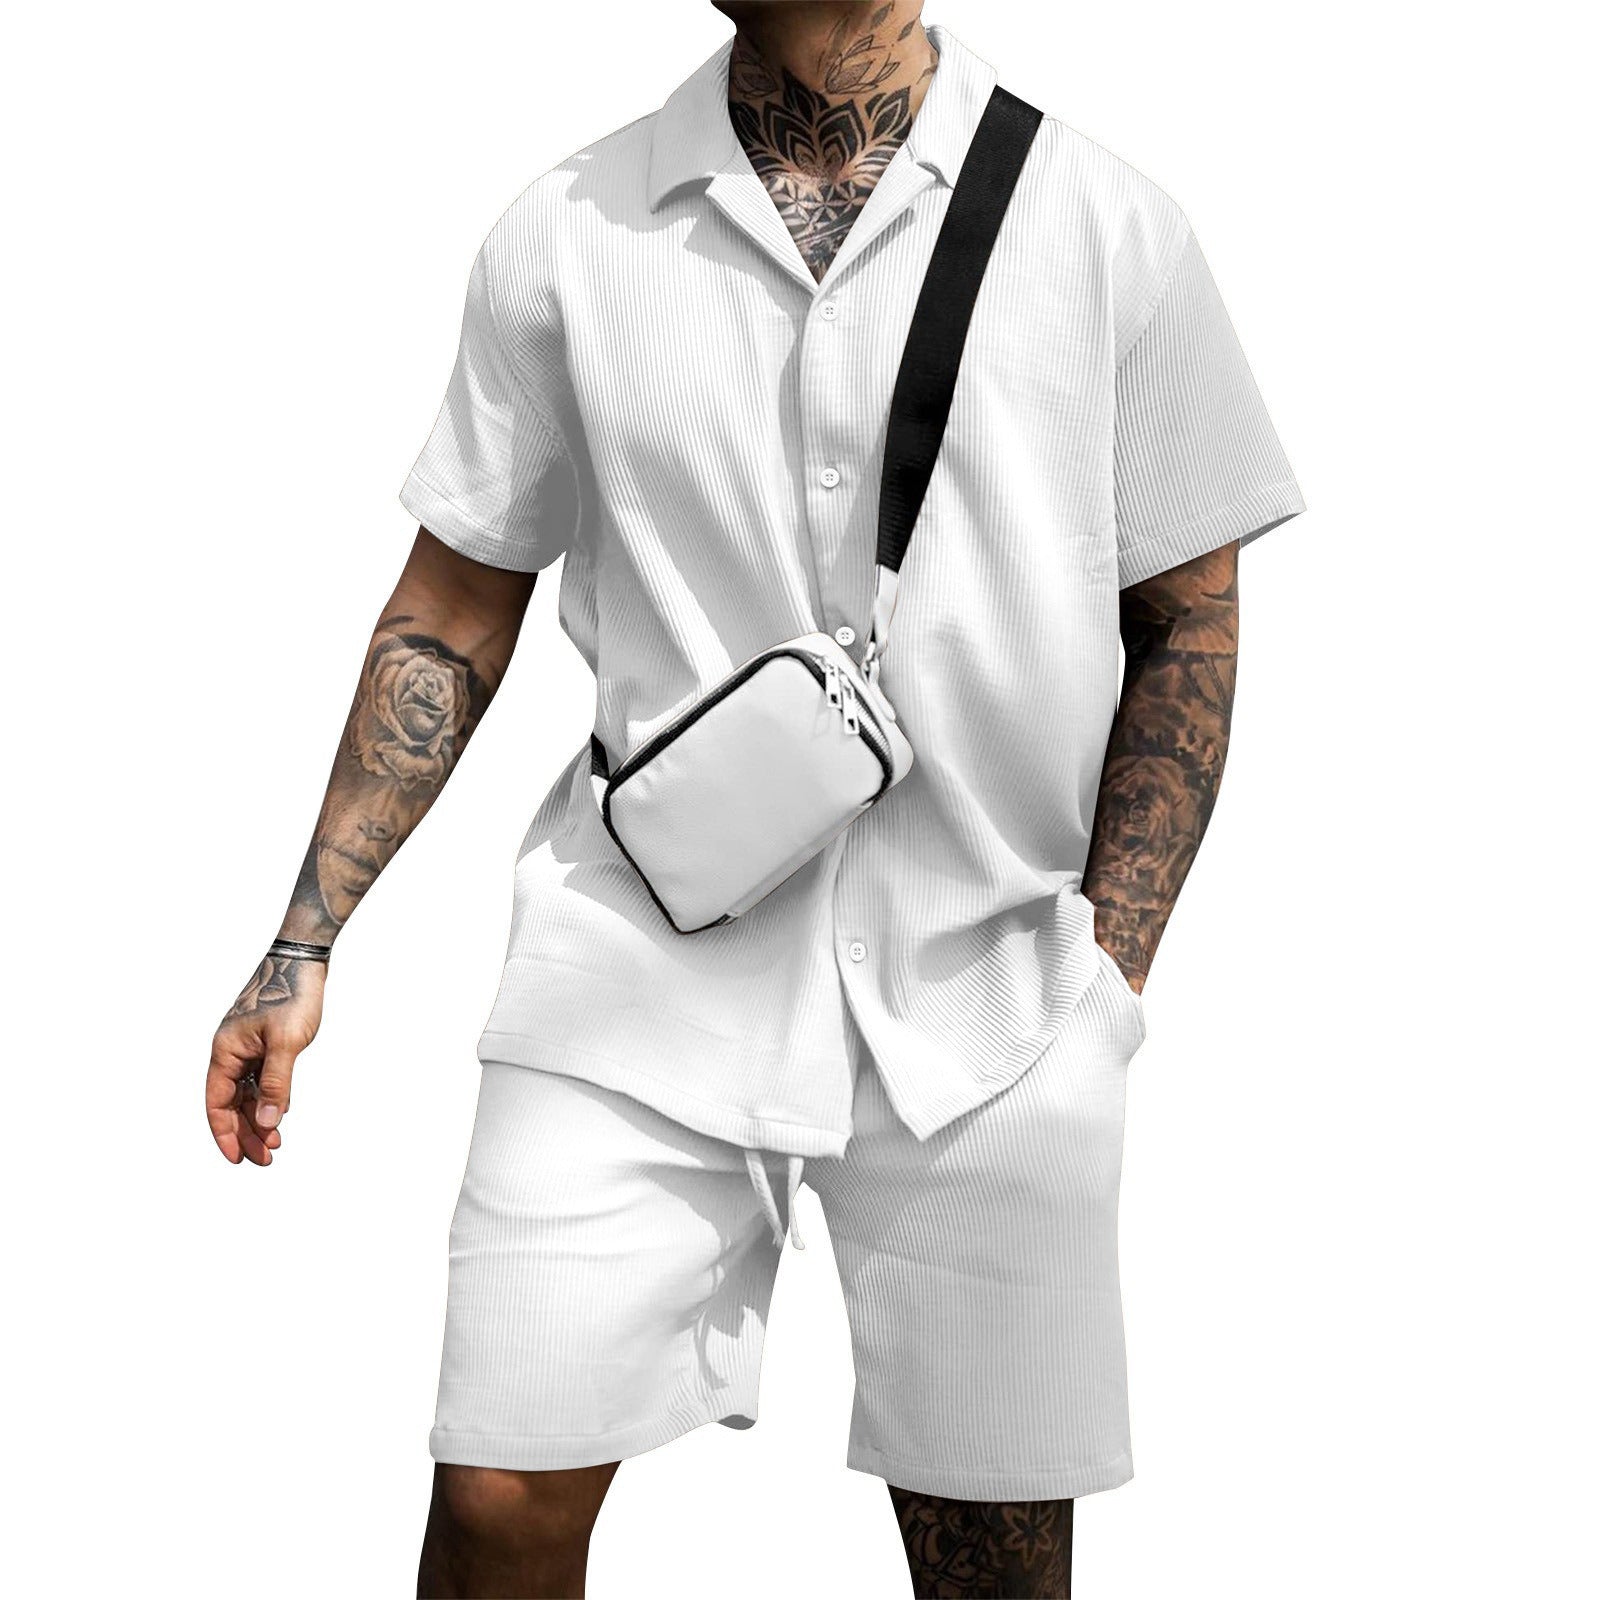 Men's Casual 2 Piece Outfits Lapel Neck Short Sleeve Button Down Shirt and Shorts Set